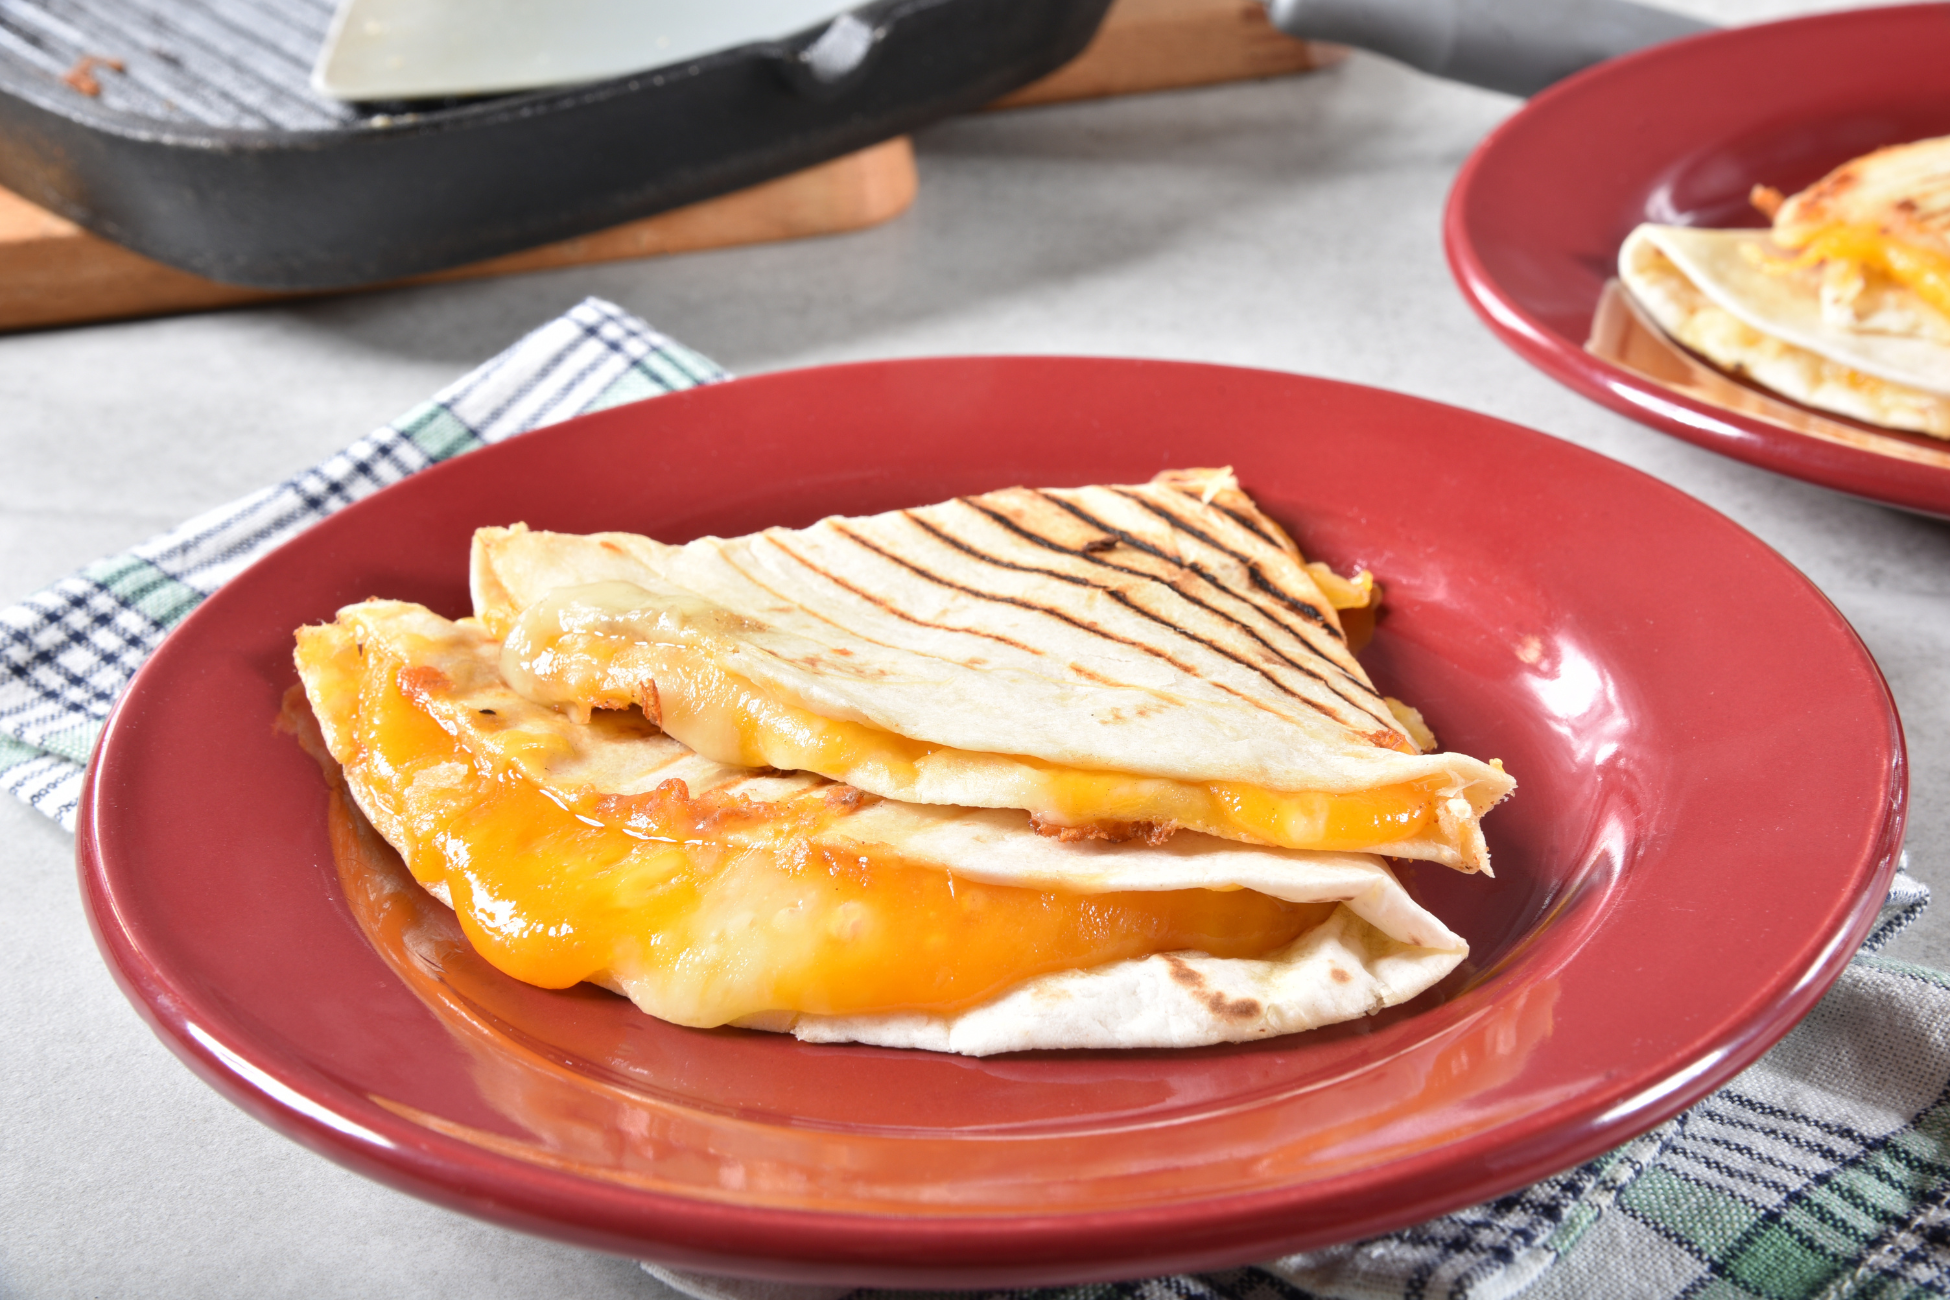 Quick and Easy Cheesy Quesadillas – A Delicious Mexican Snack or Meal for Kids